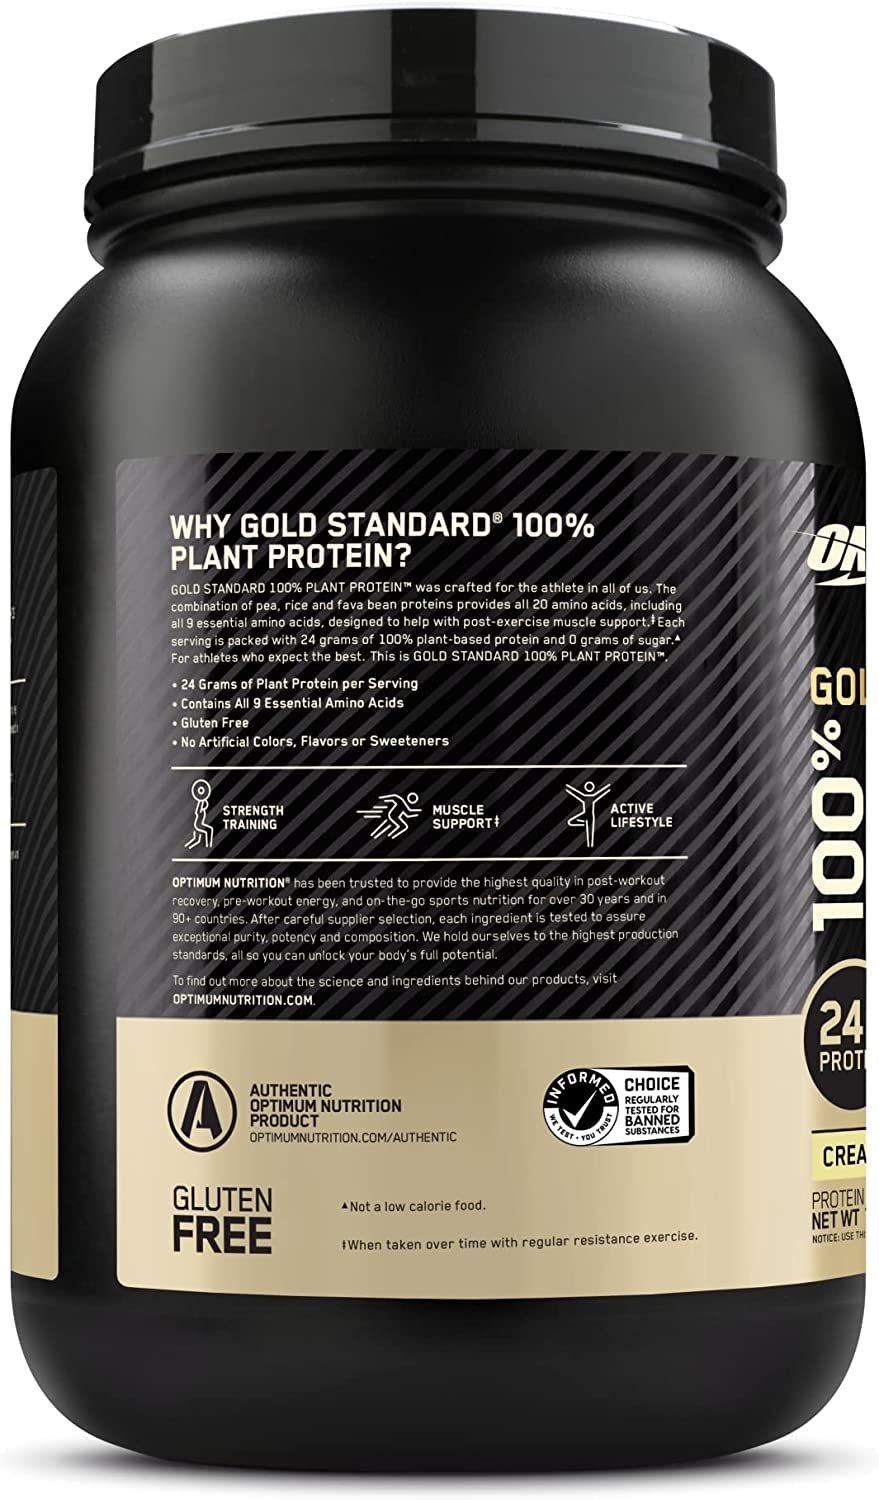 Optimum Nutrition Gold Standard 100% Plant Based Protein Powder, Gluten Free, Vegan Protein for Muscle Support and Recovery with Amino Acids - Creamy Vanilla, 20 Servings